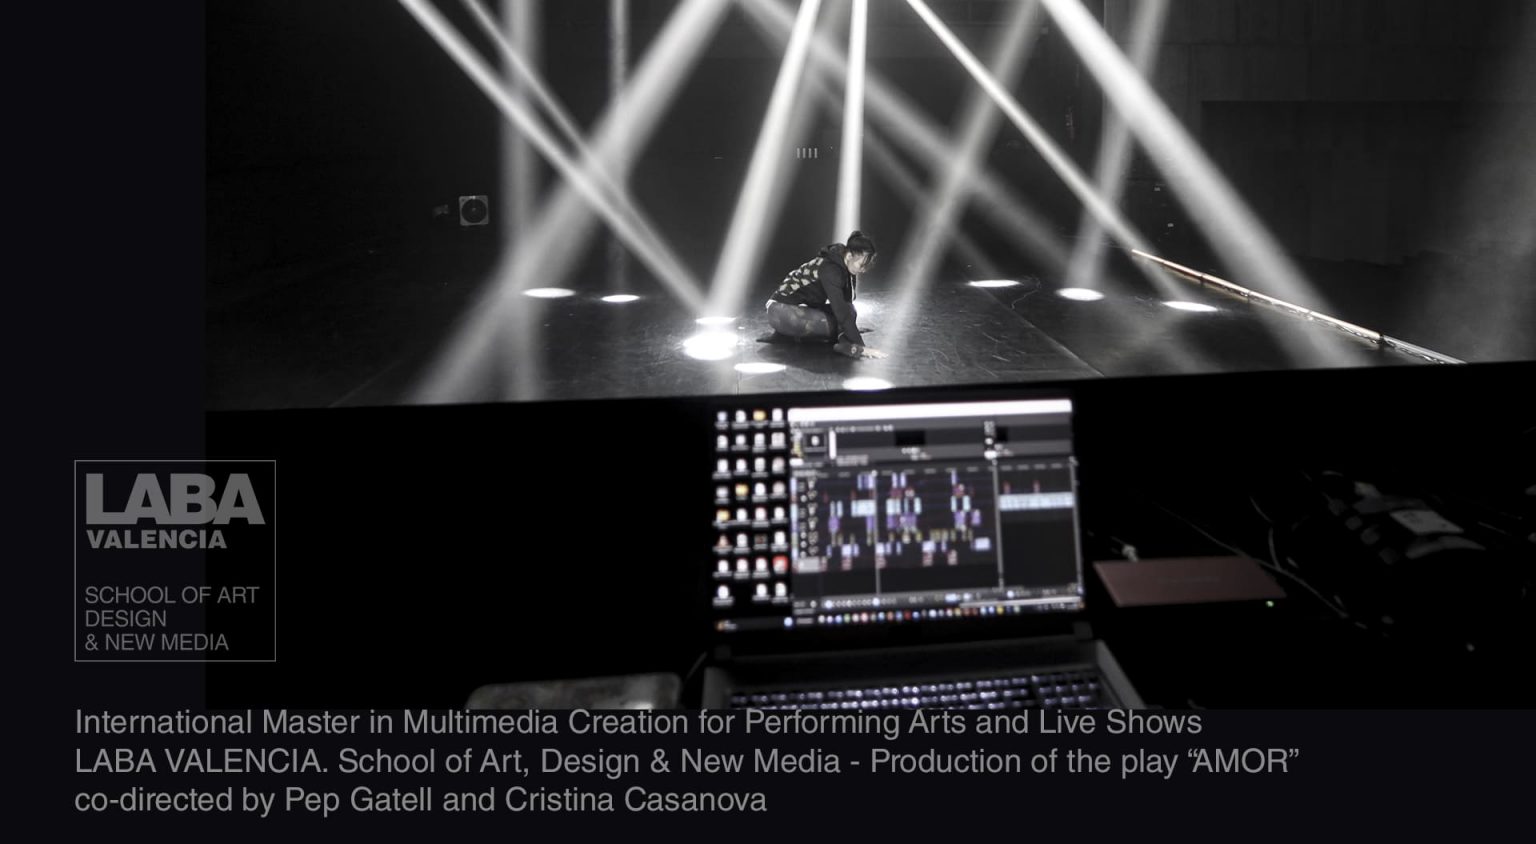 LABA Valencia - International Master in Multimedia Creation for Performing Arts and Live Shows